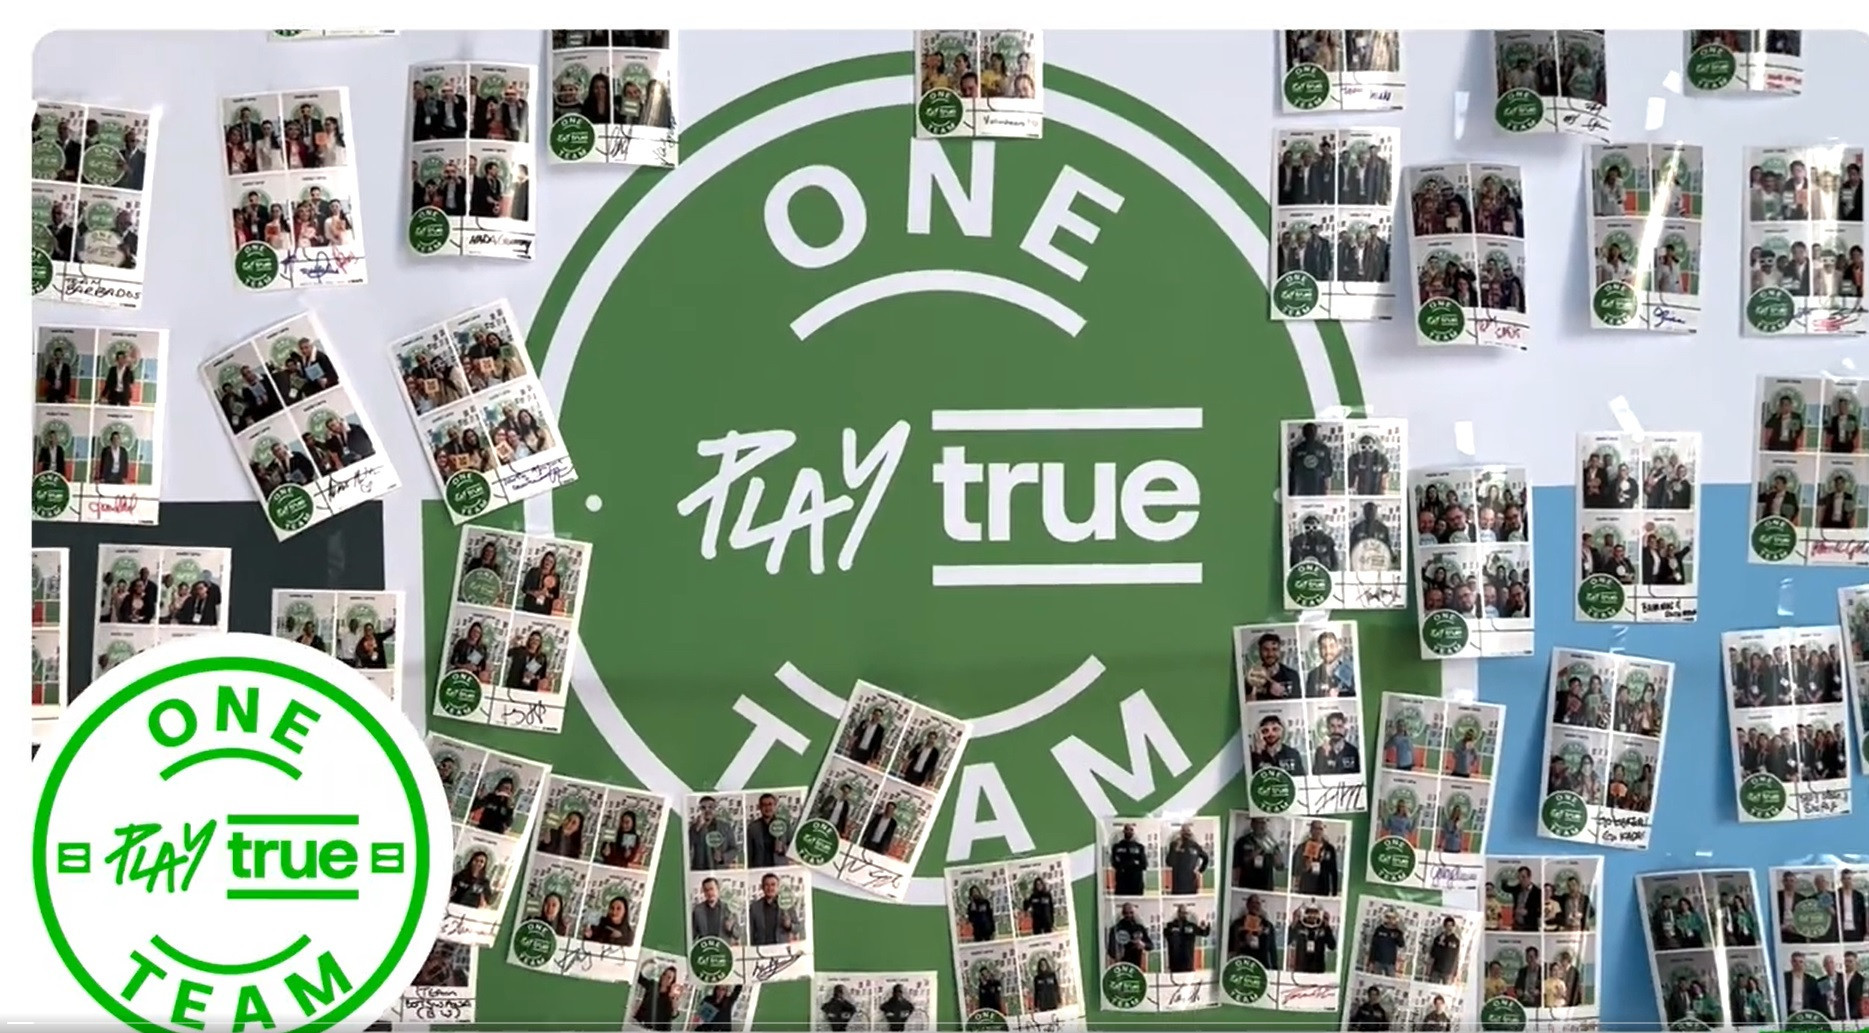 WADA spreads message of clean sport with Play True Day online campaign